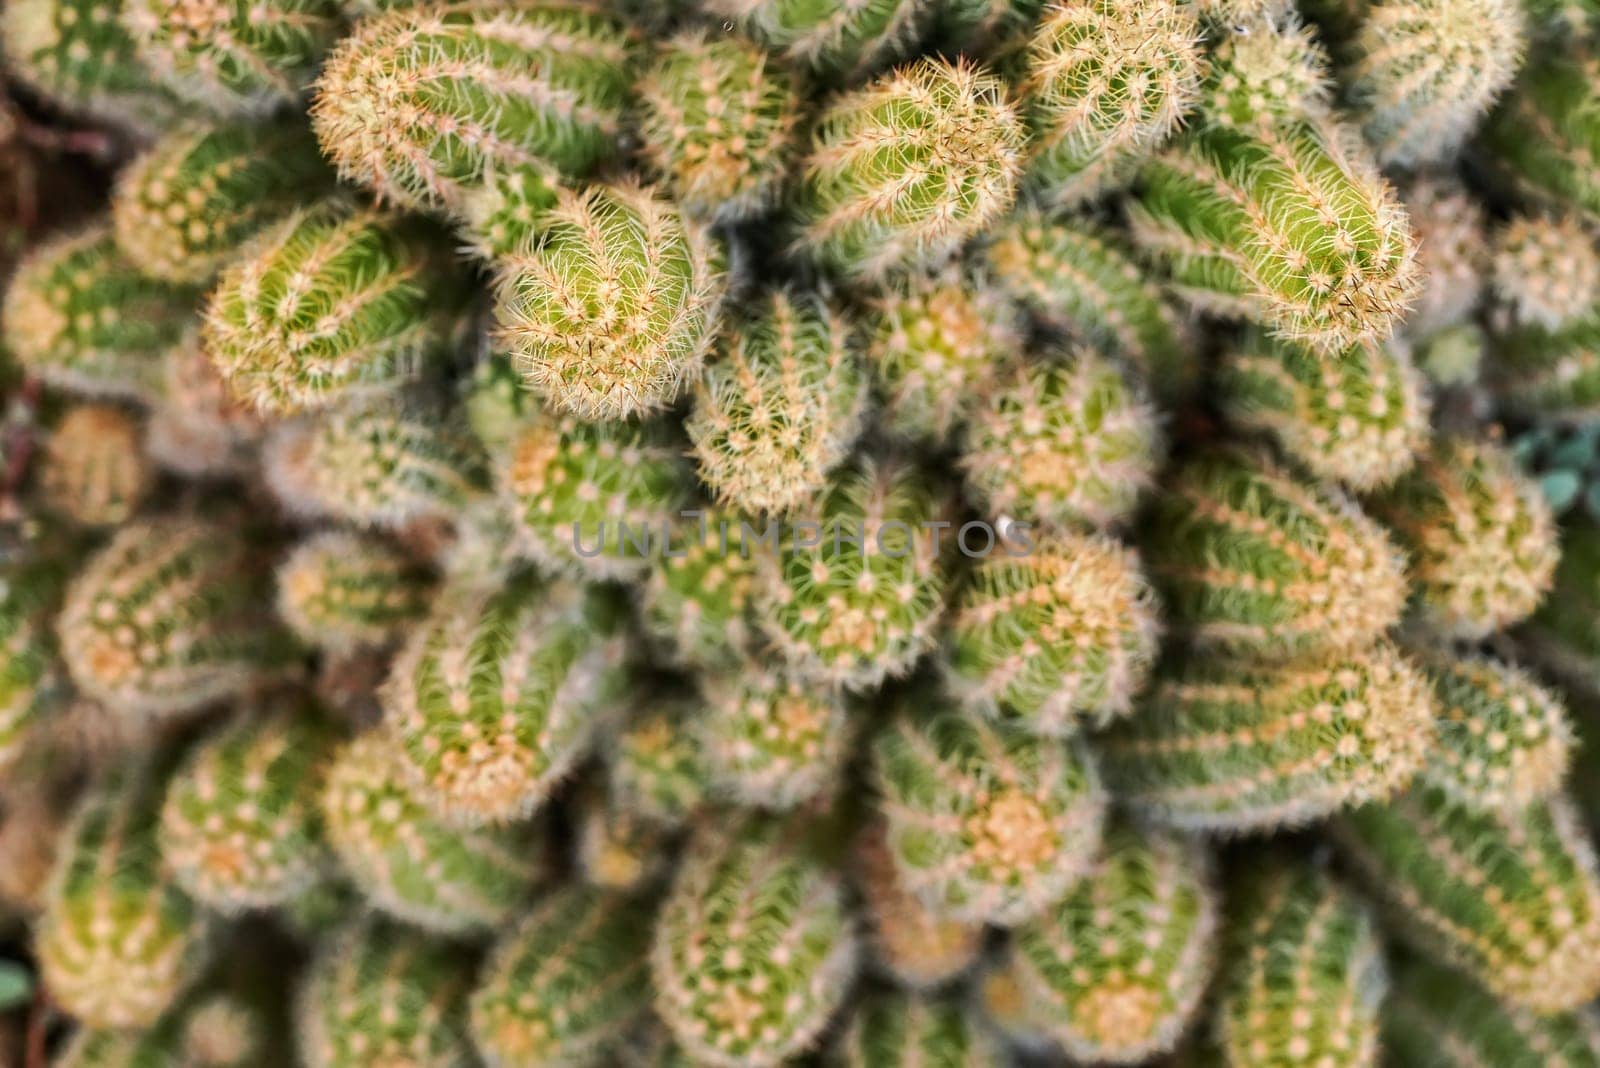 Closeup detail - group of cacti growing together, sharp thorns on green plants, top down view by Ivanko